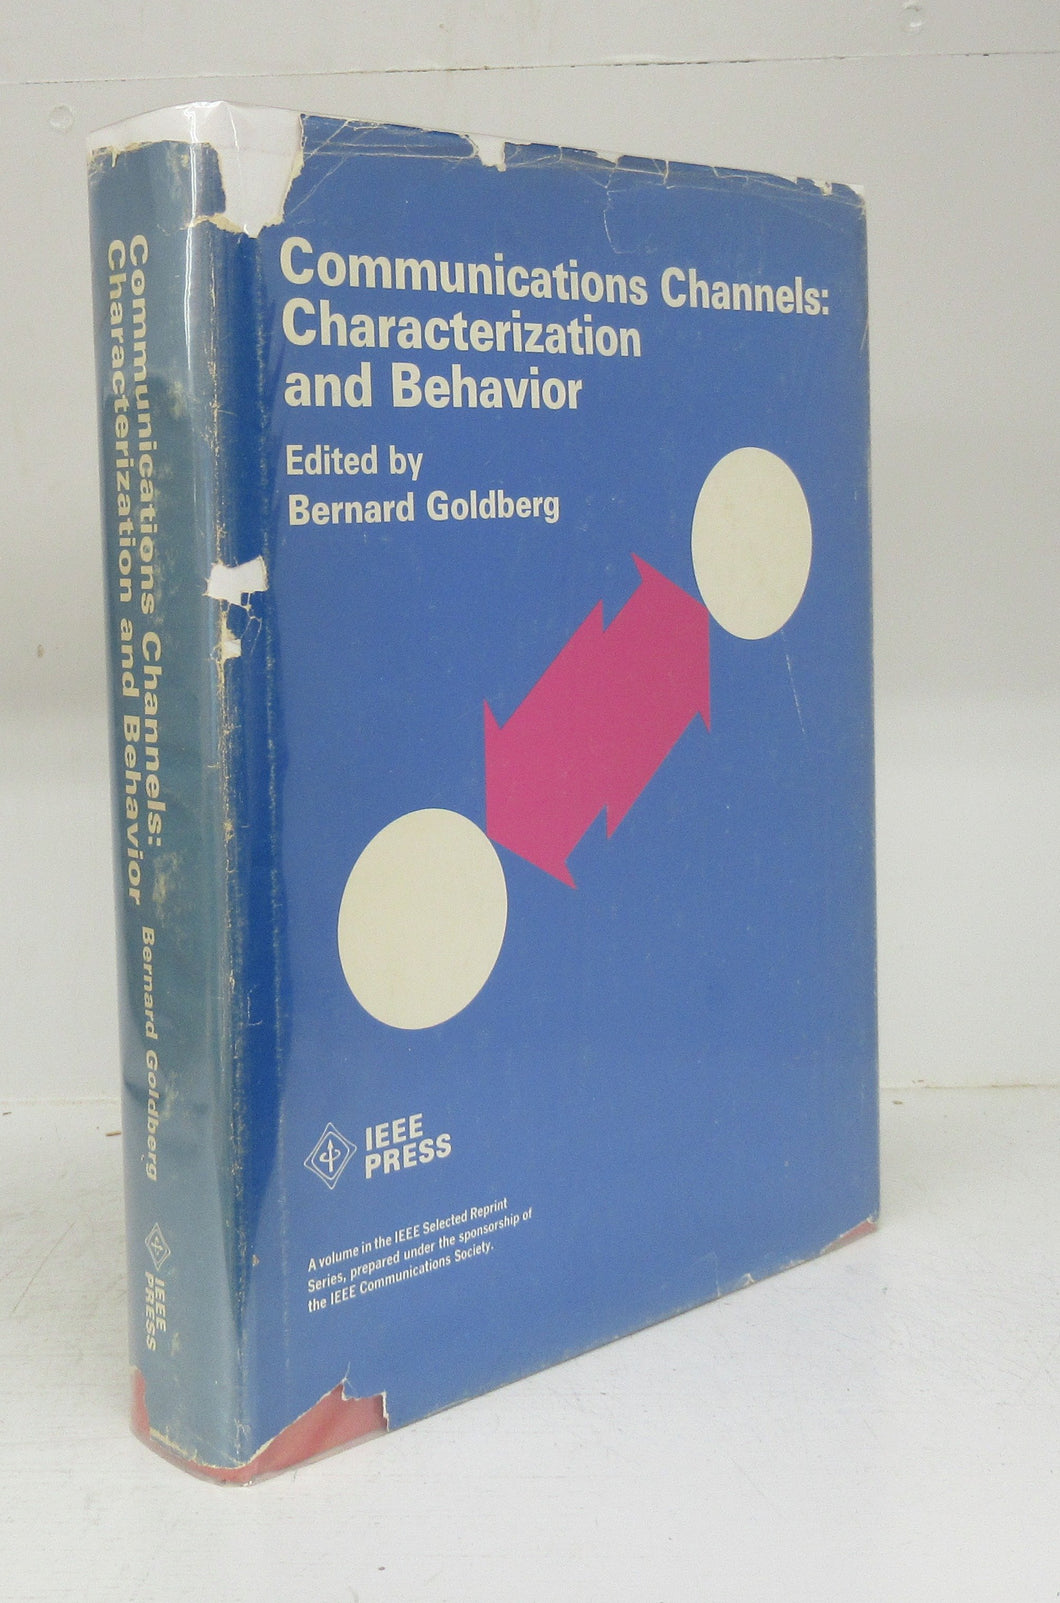 Communications Channels: Characterization and Behavior